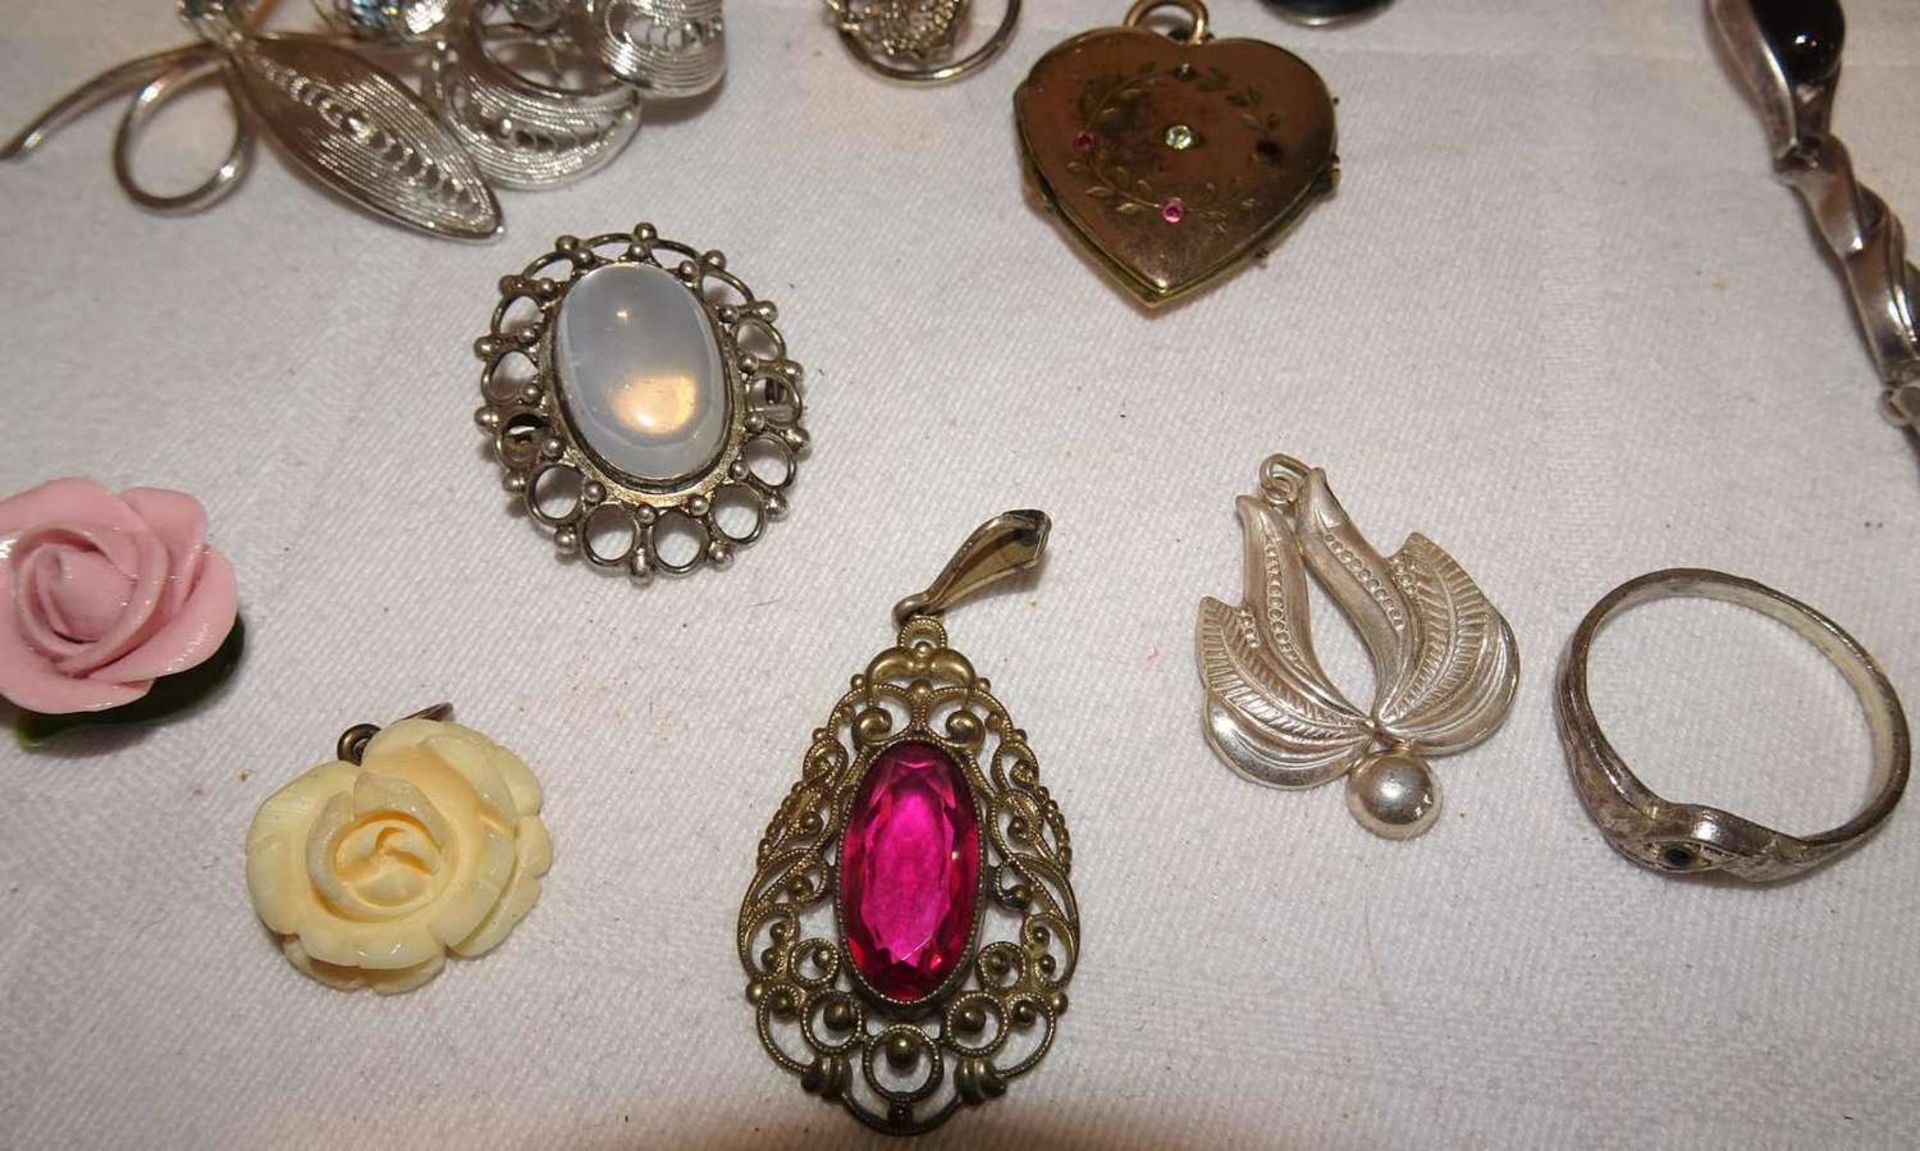 Lot alter Modeschmuck, dabei Broschen, Anhänger, etc.Lot of old fashion jewelry, including brooche - Image 2 of 2